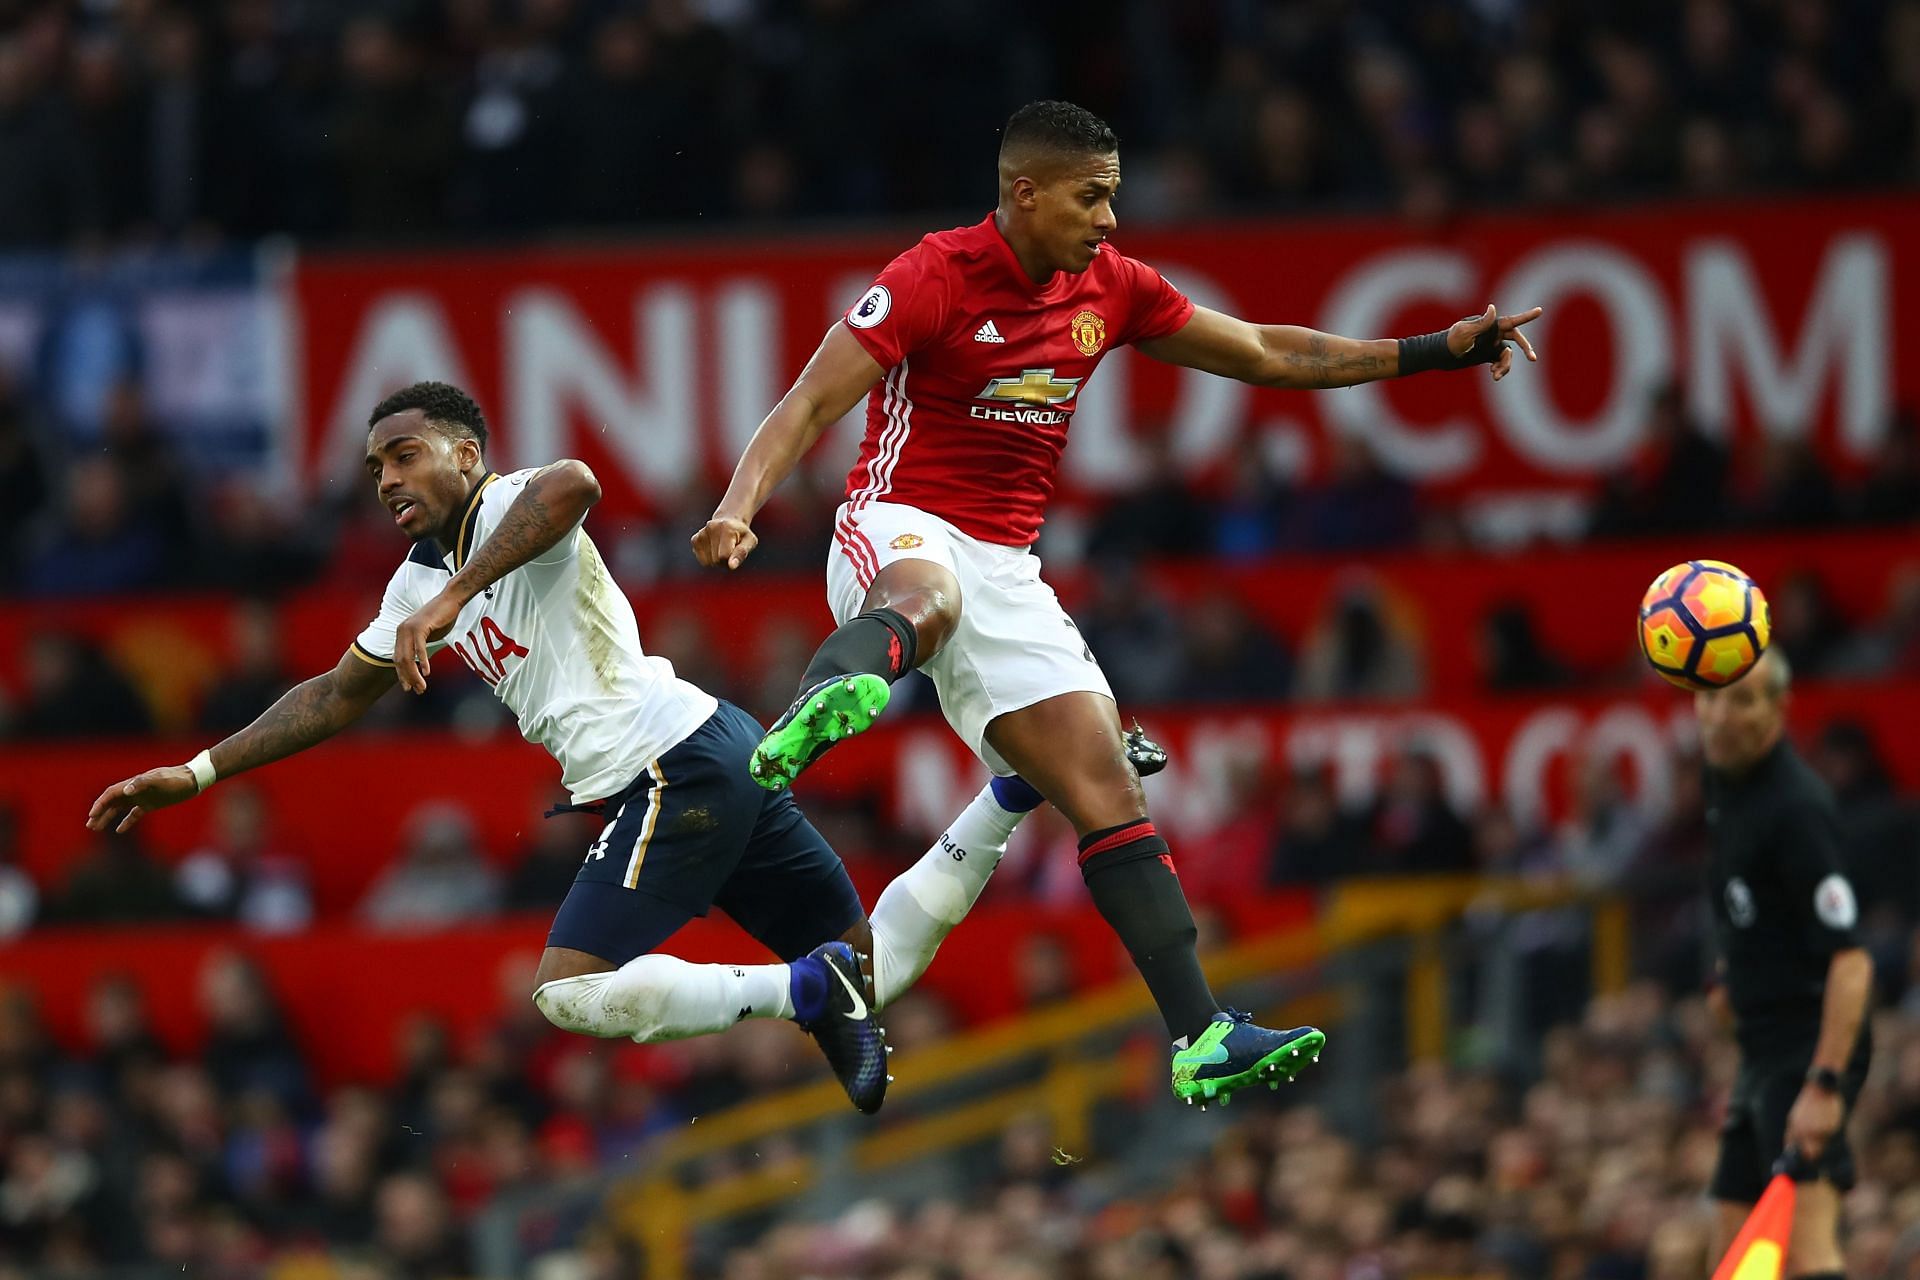 Valencia is a modern-day Manchester United legend